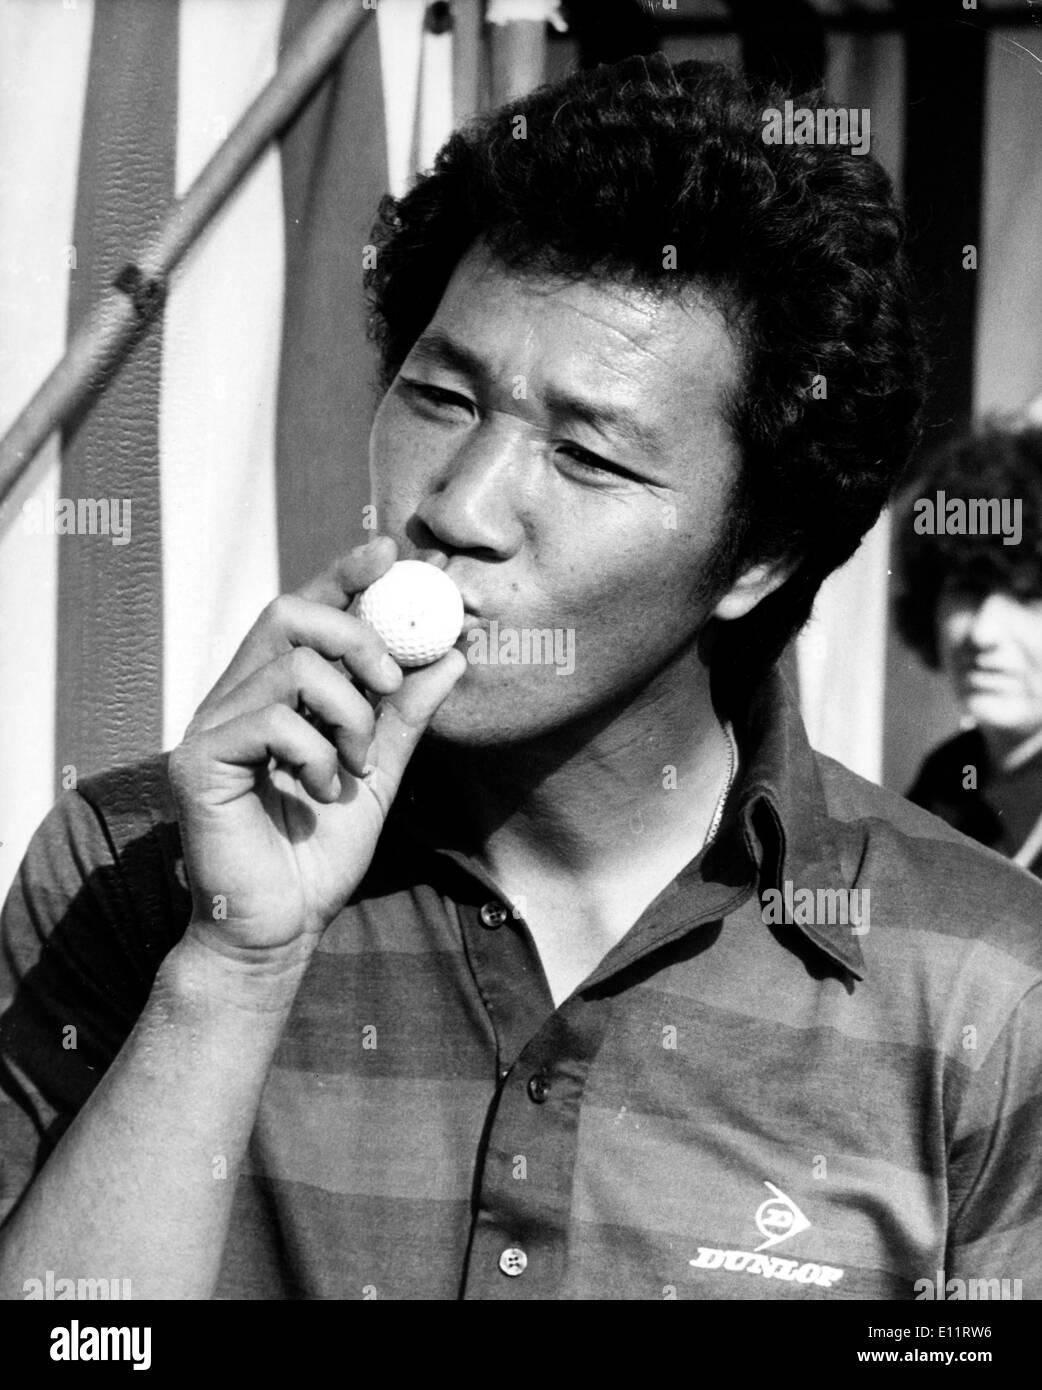 Oct 12, 1979; Wentworth, Scotland; The Japanese Golf star ISAO AOKI made a hole in one at the 155 yard second hole during the Suntory World Matchplay Championships at wentworth today. It won him a 40,000 pounds house overlooking the famous Gleneagles golf course in Scotland, and 15,000 pounds with which to furnish it. This is the biggest golf prize eveer won in Britain. The picture shows Aoki giving the ball a kiss after he had holed the second in one at Wentworth today. Stock Photo